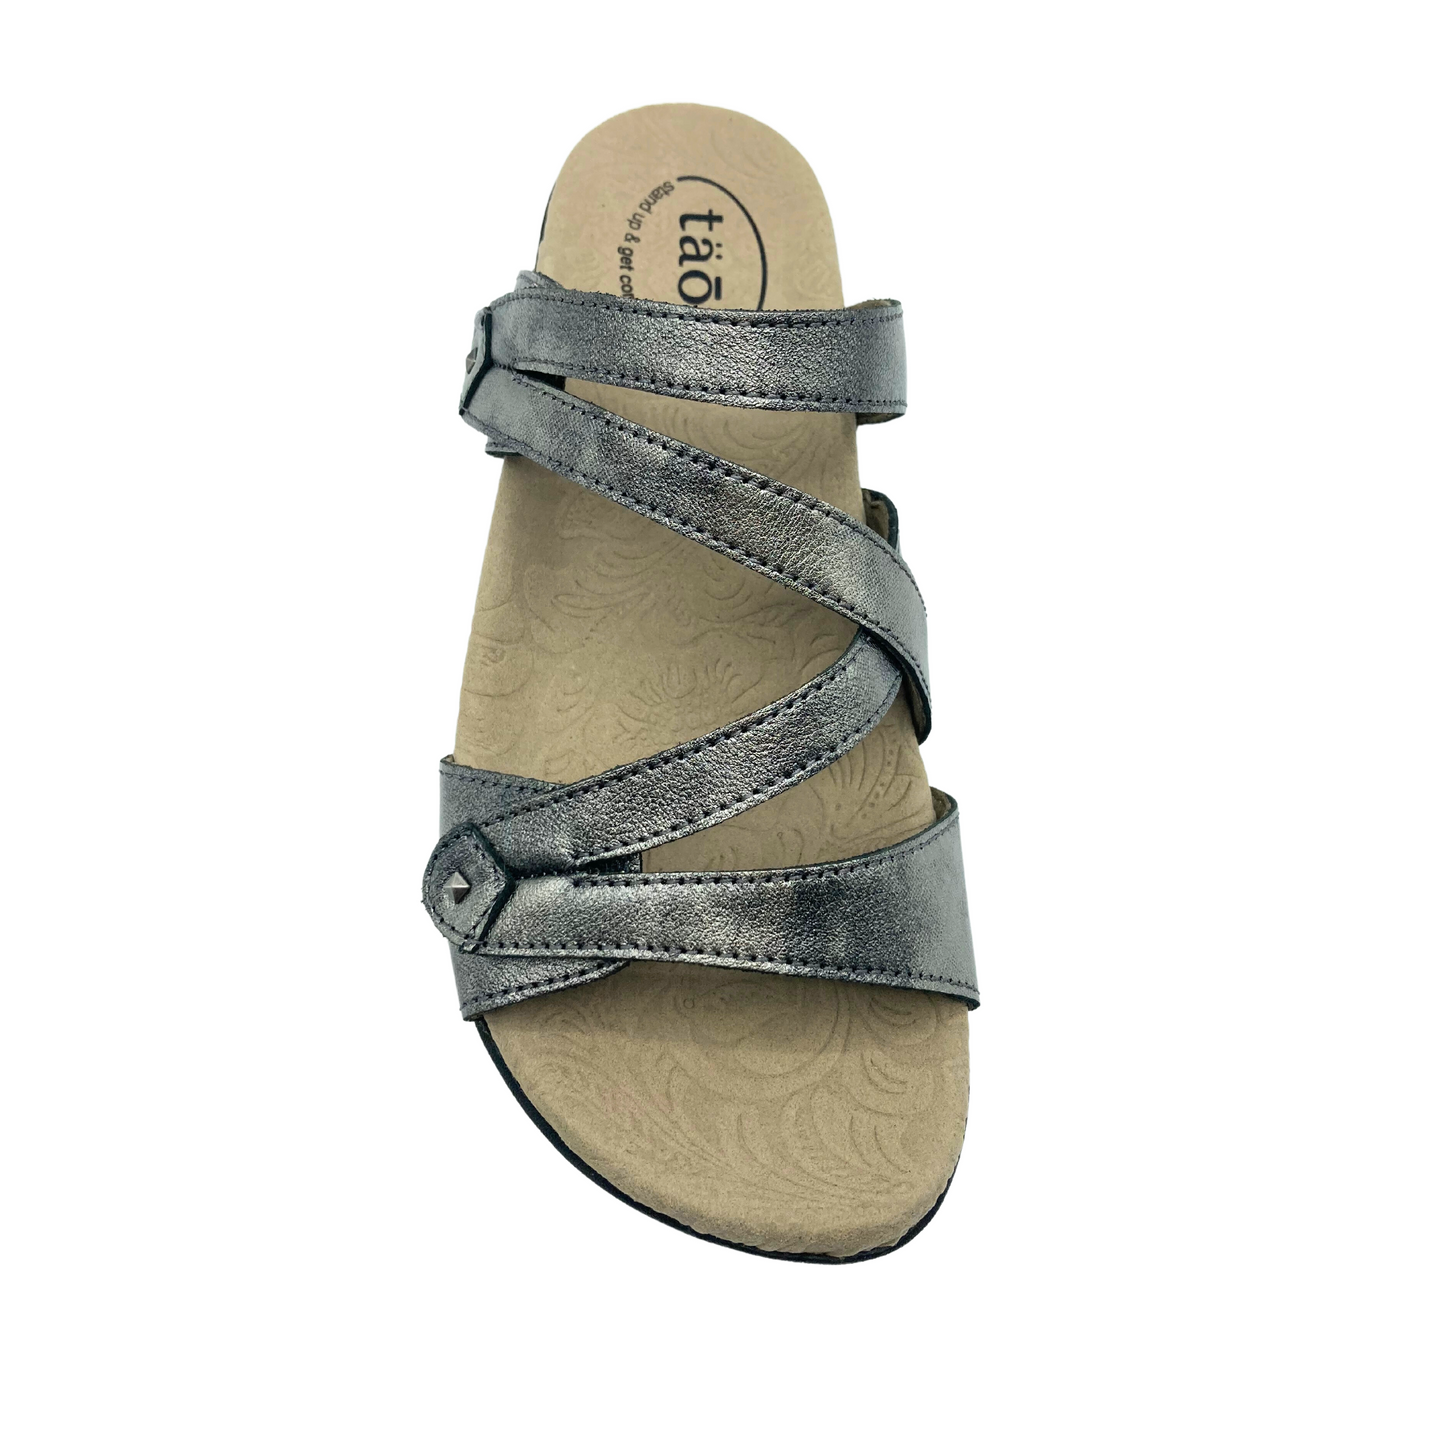 Top down view of Taos Double U in pewter.   Double strap mule sandal